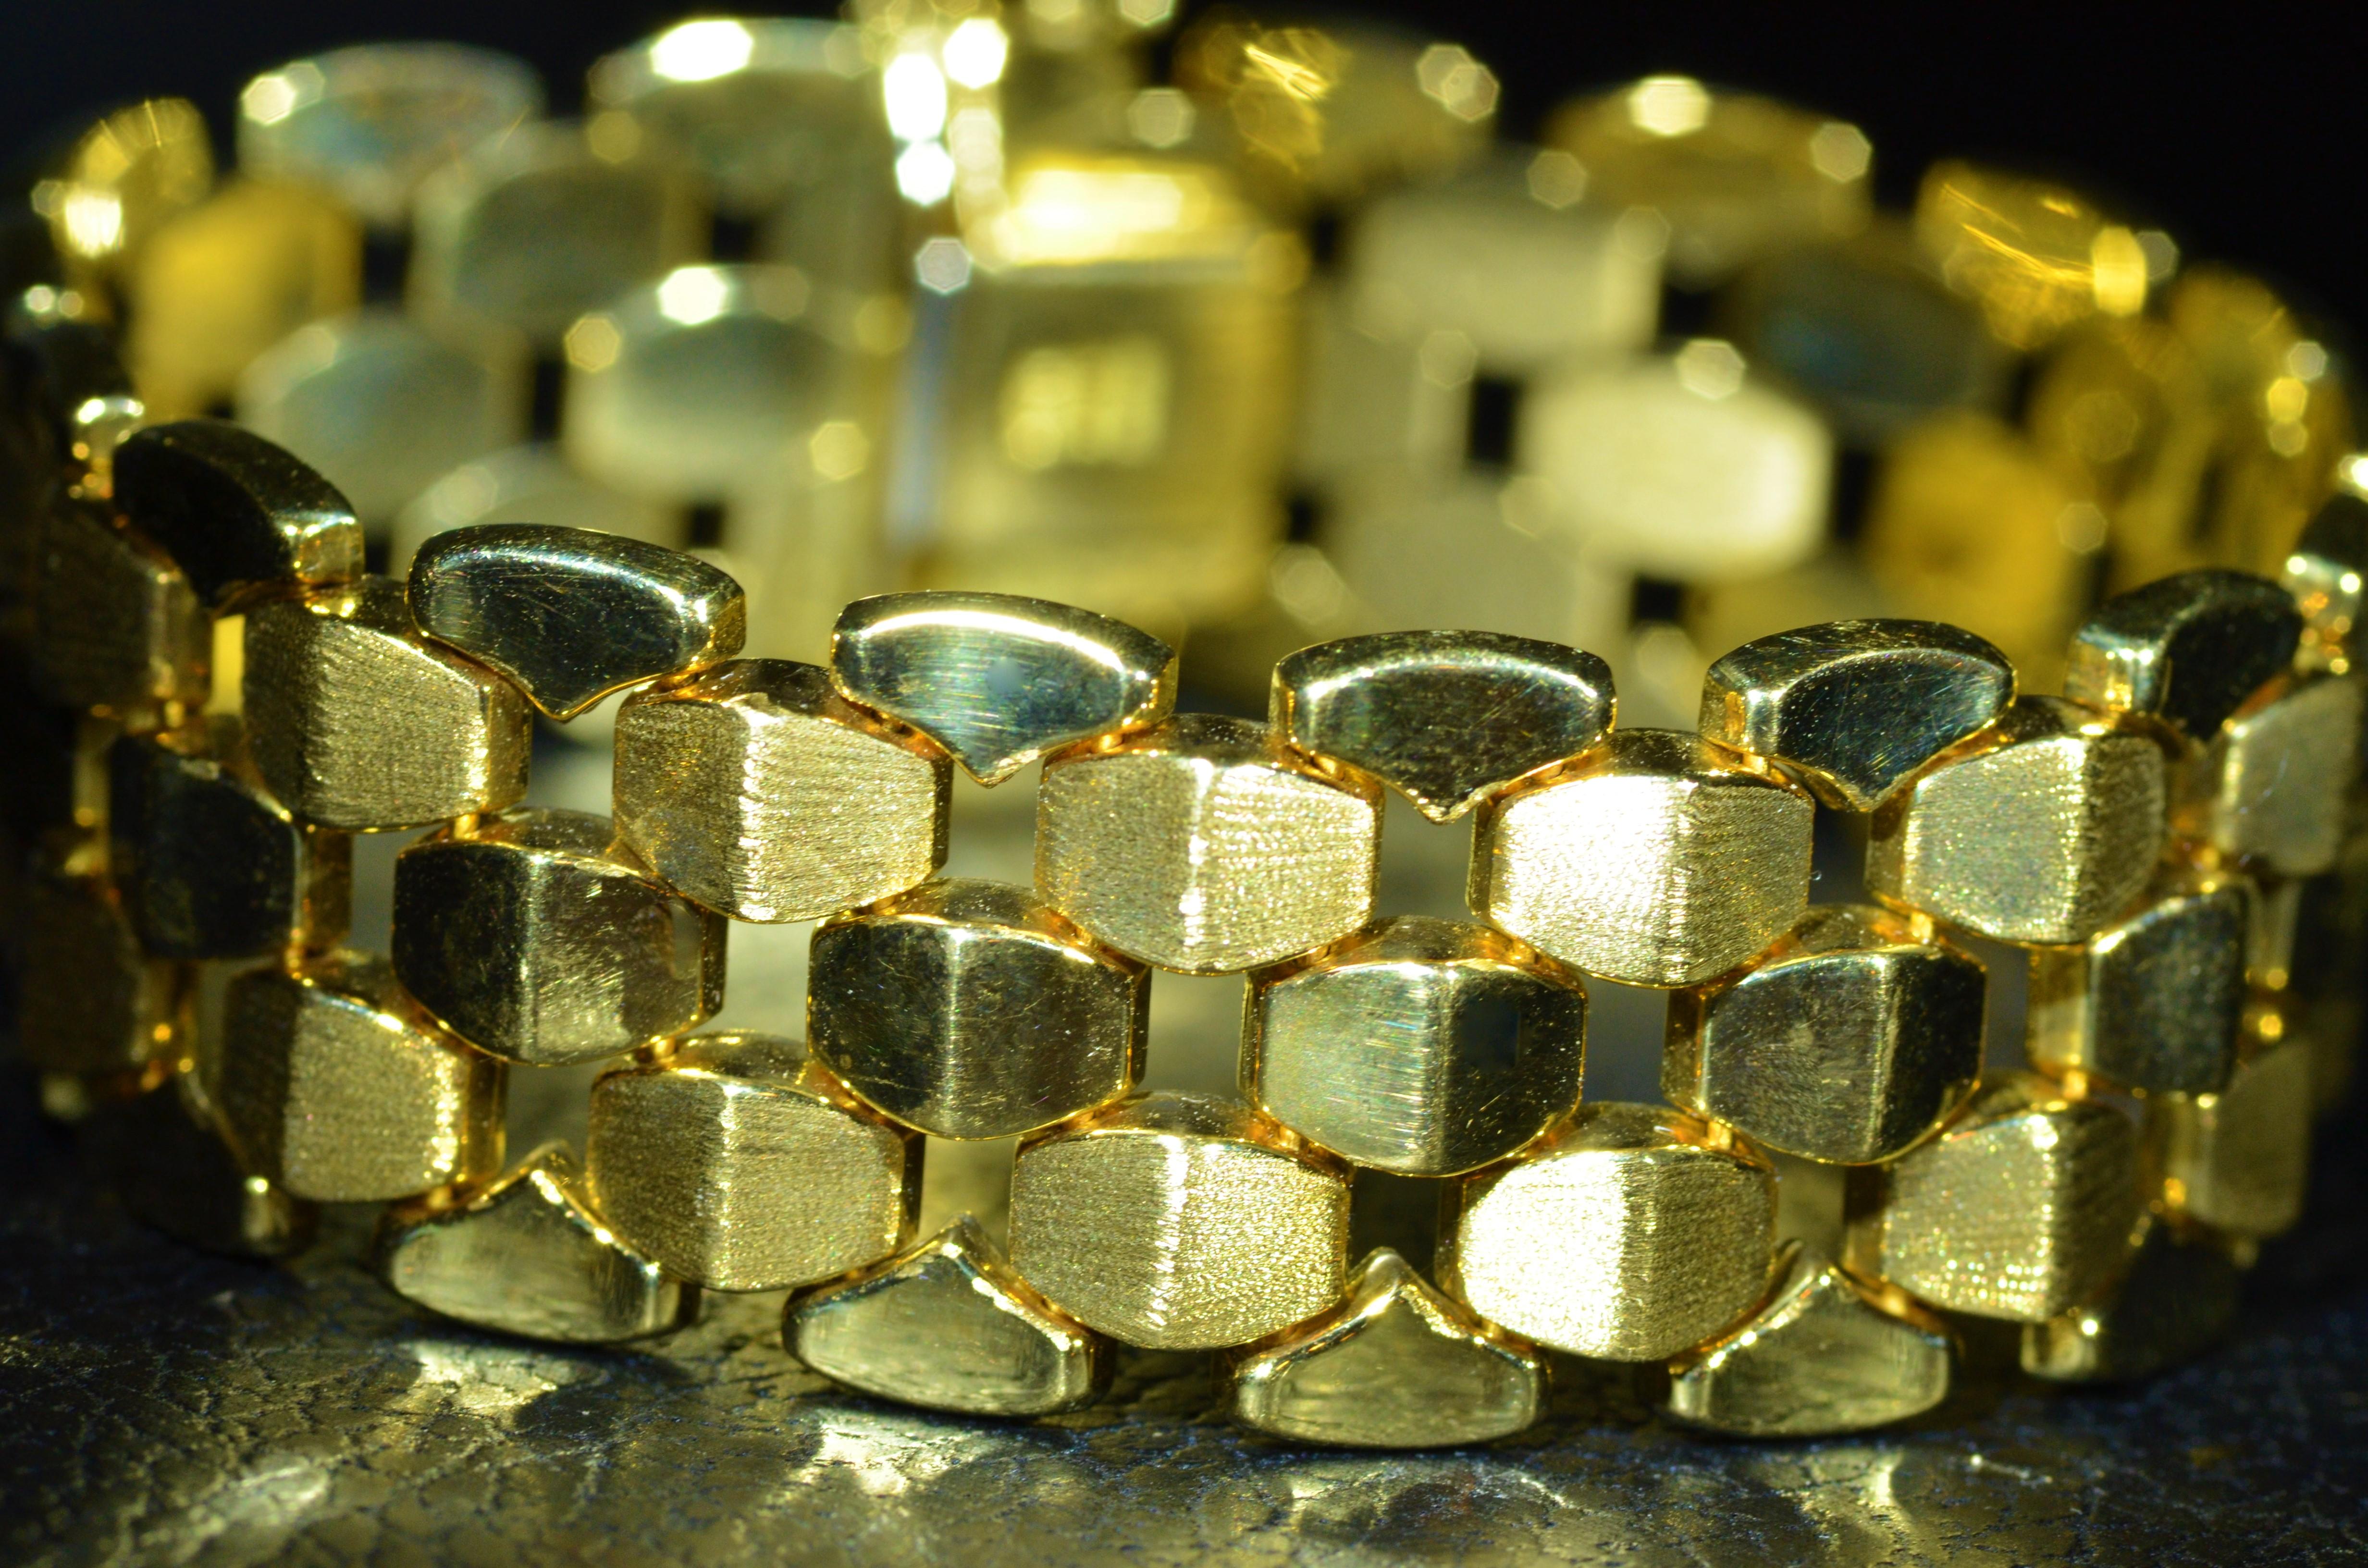 18 Karat yellow gold retro modernist bracelet.  Links are brushed and polished for a very attractive eye appeal.  The bracelet is Italian made by Milros